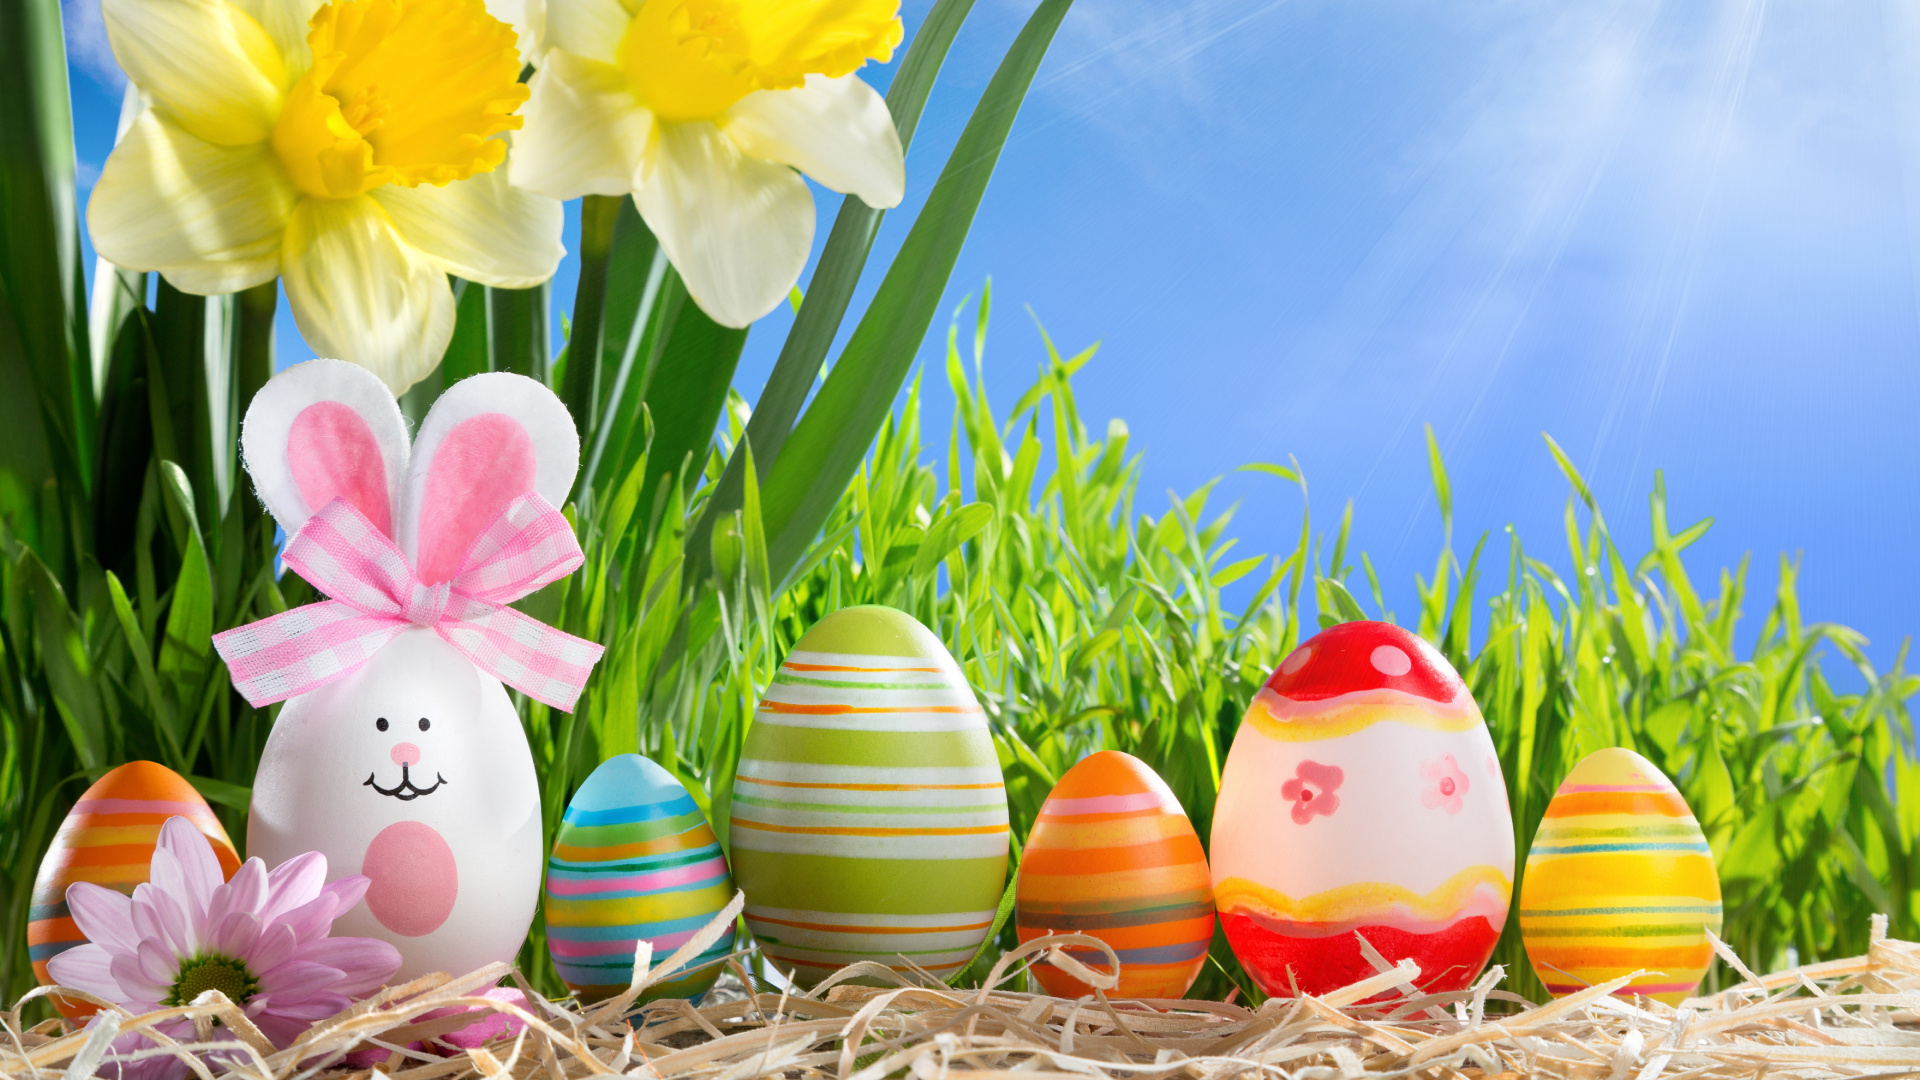 Easter Egg, Spring, Holiday, Easter, Grass. Wallpaper in 1920x1080 Resolution